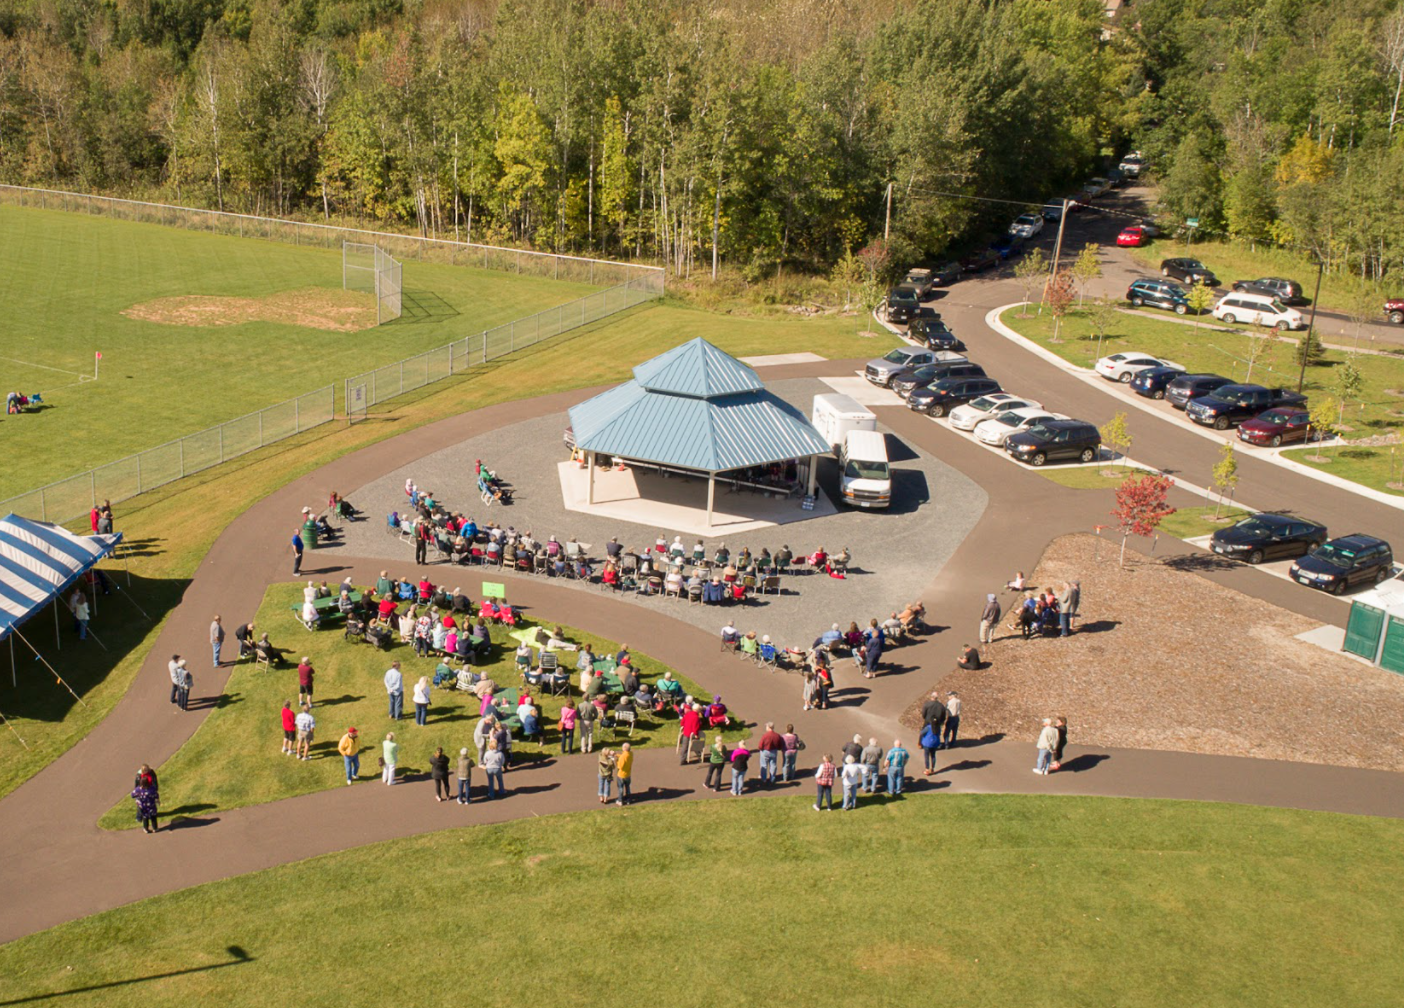 An aerial view of a group of people watching a concert at the Pavilion at GND REC